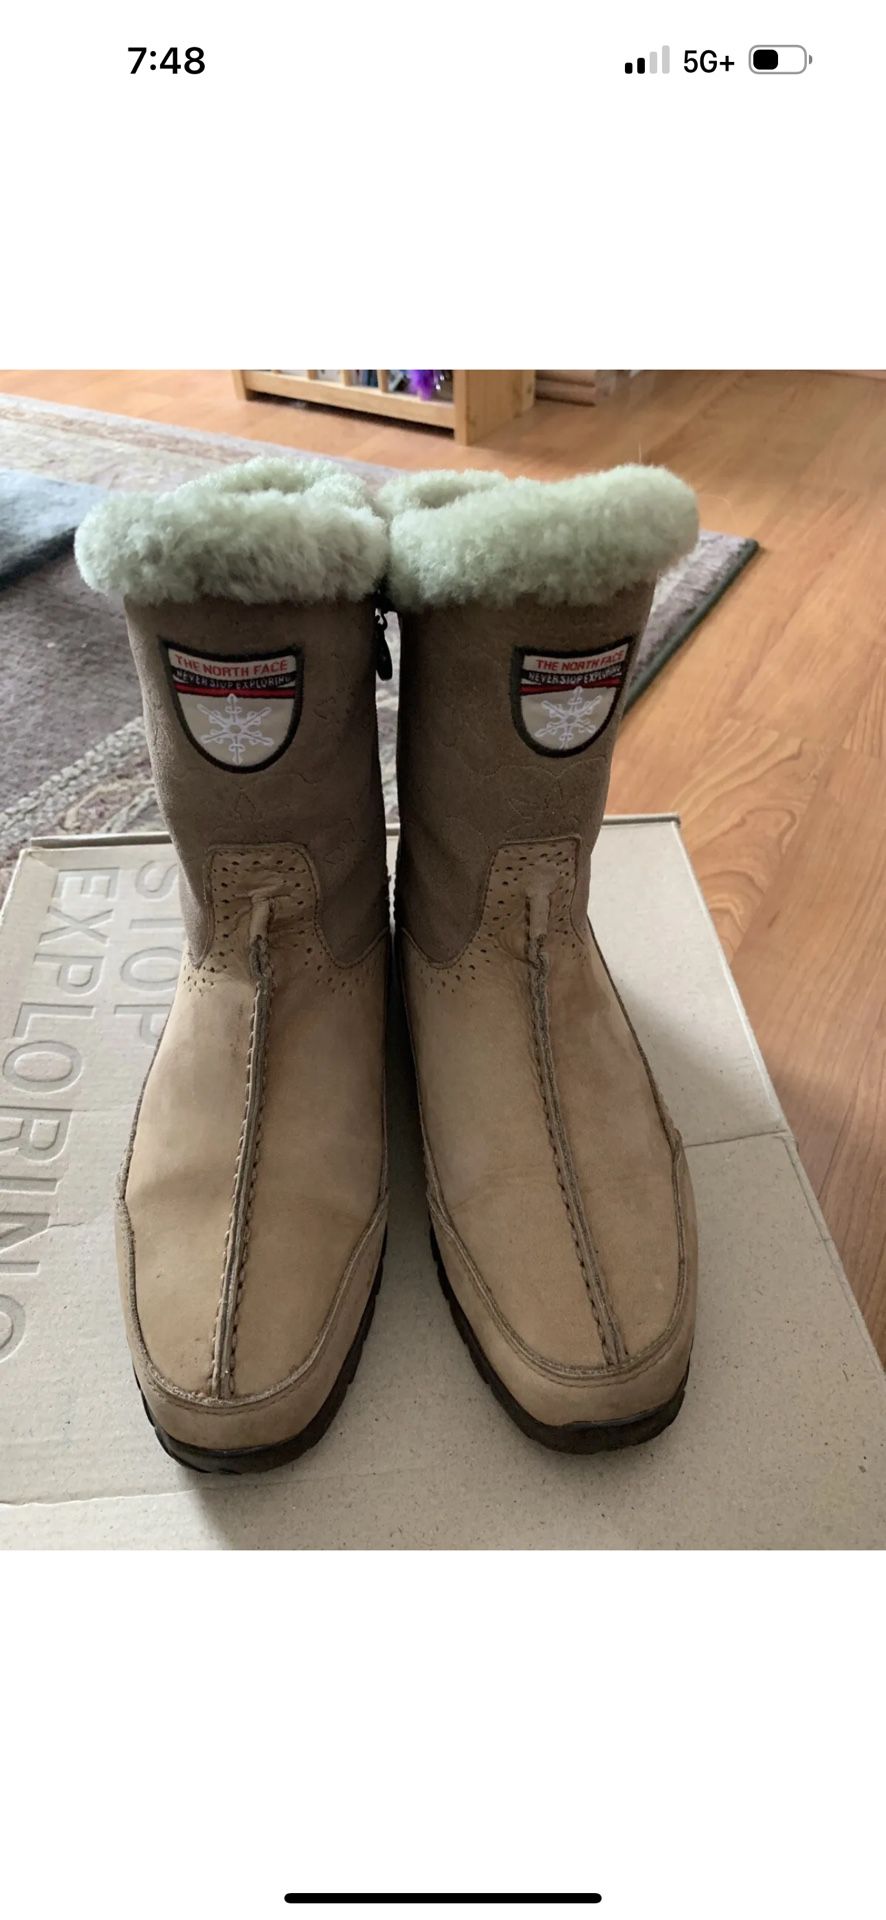 The North Face Women’s Winter Snow Boots Size 8